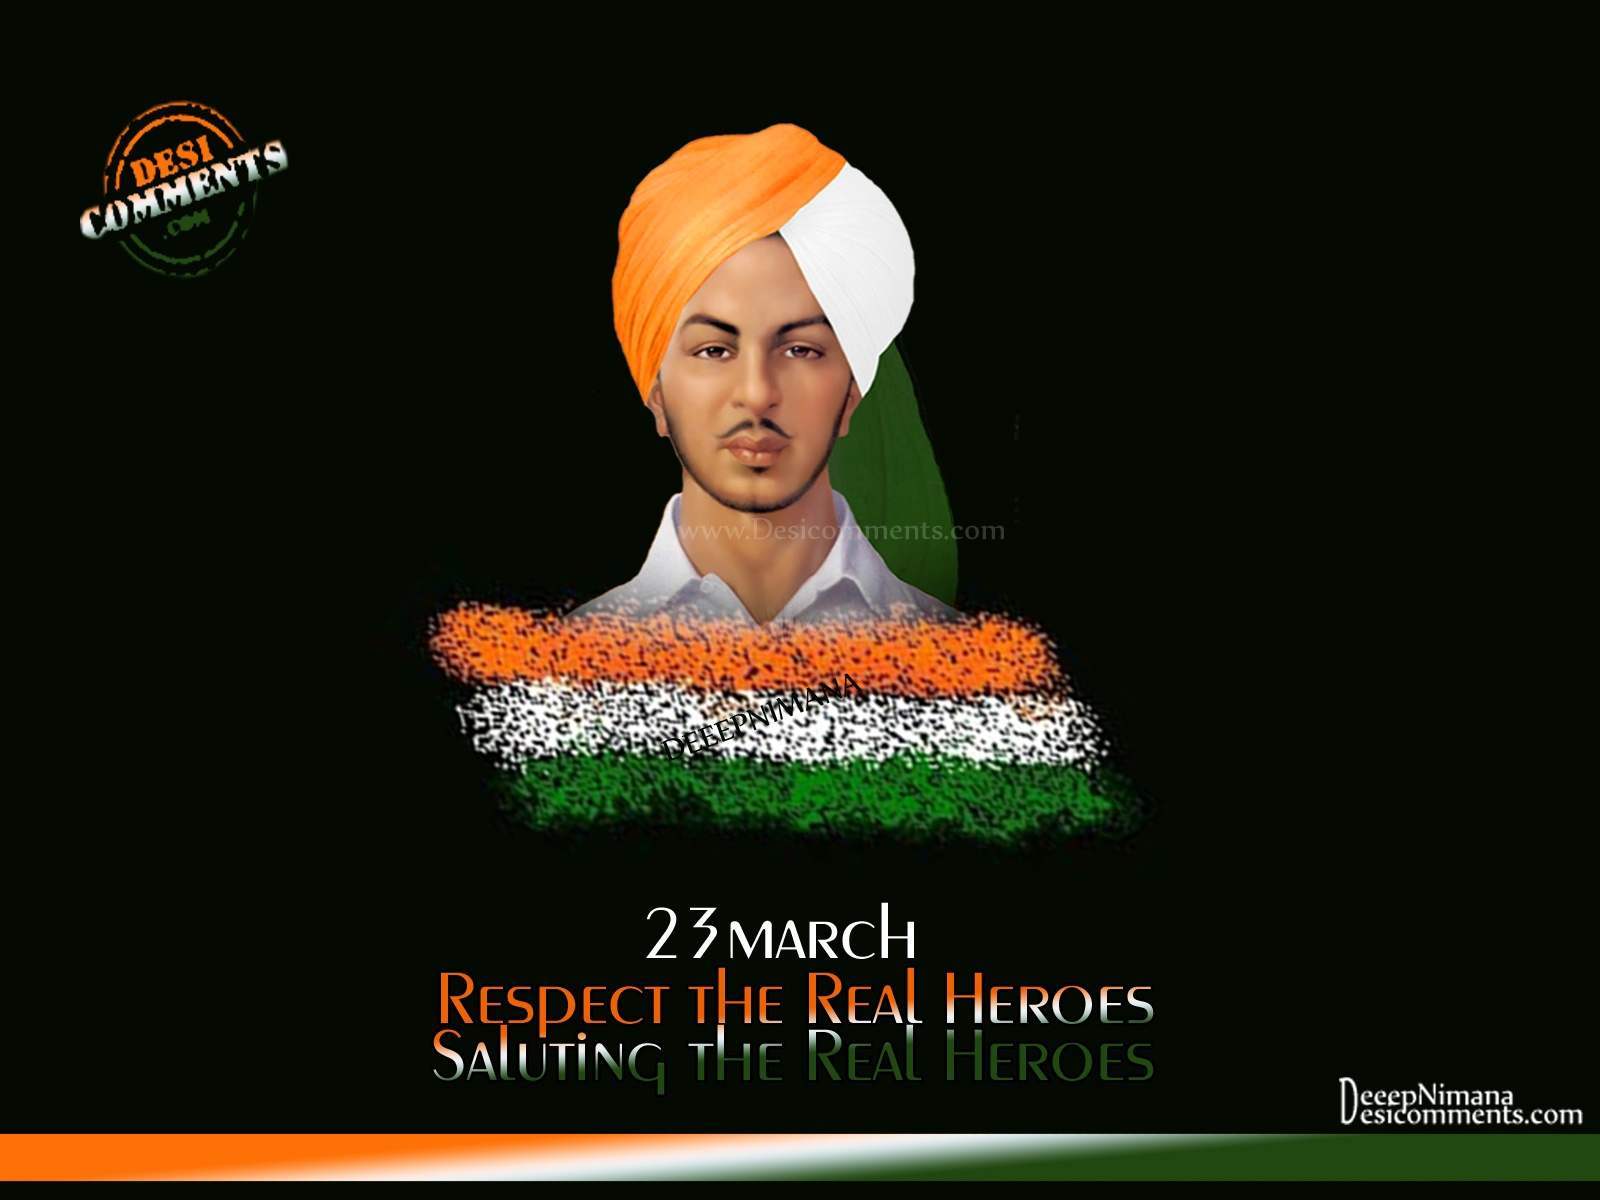 70+ Bhagat Singh Images, Pictures, Photos - Page 3